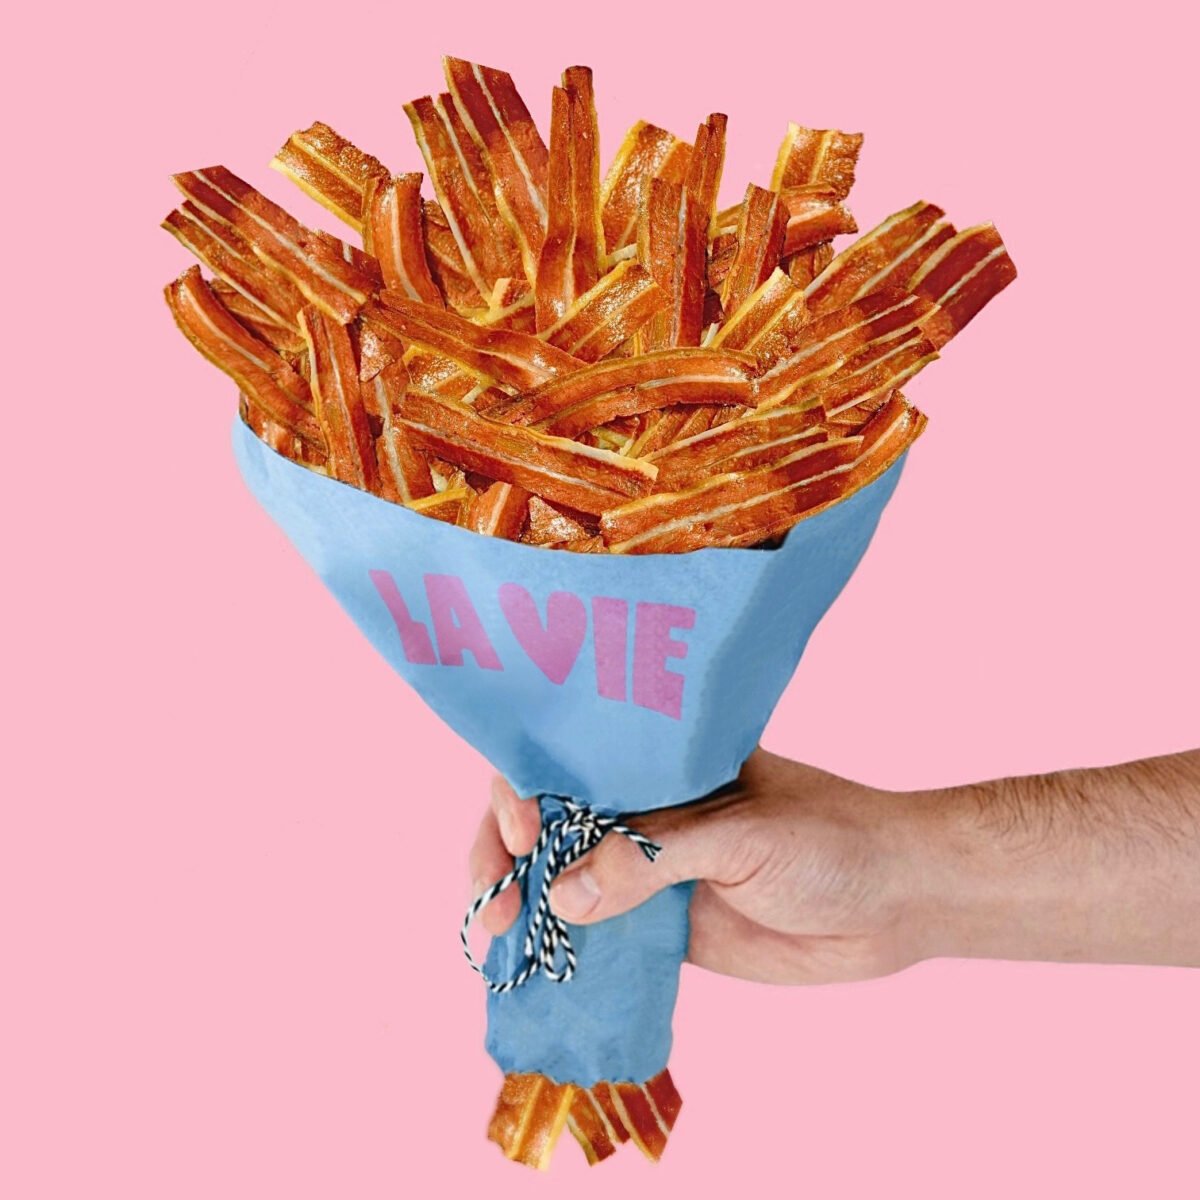 A hand holding a bouquet of vegan bacon rashers from plant-based meat brand La Vie